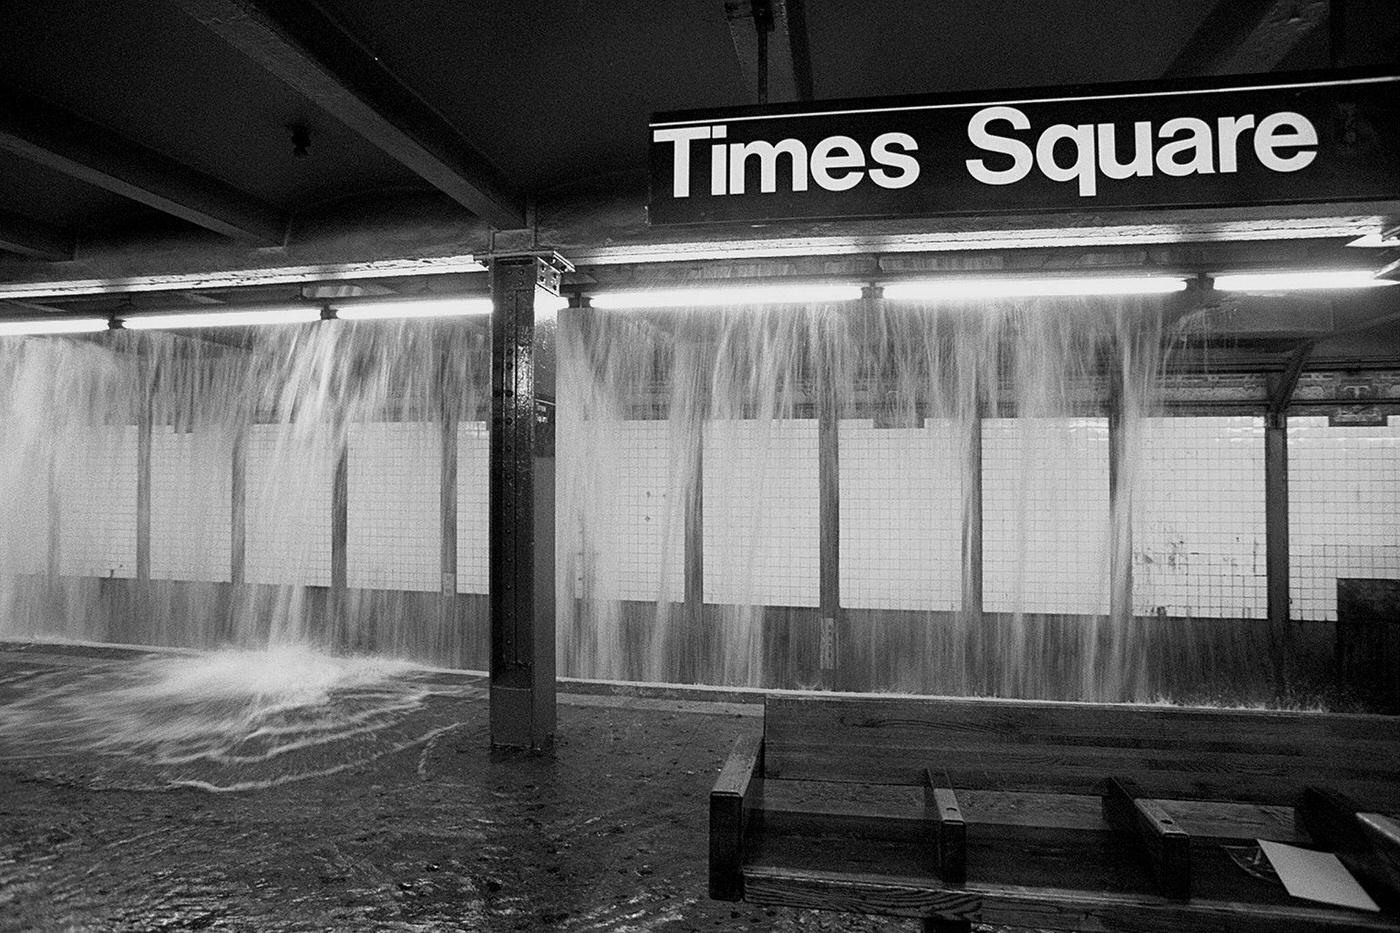 Water Main Break At 7Th Ave And 40Th St., Times Square, Manhattan, 1995